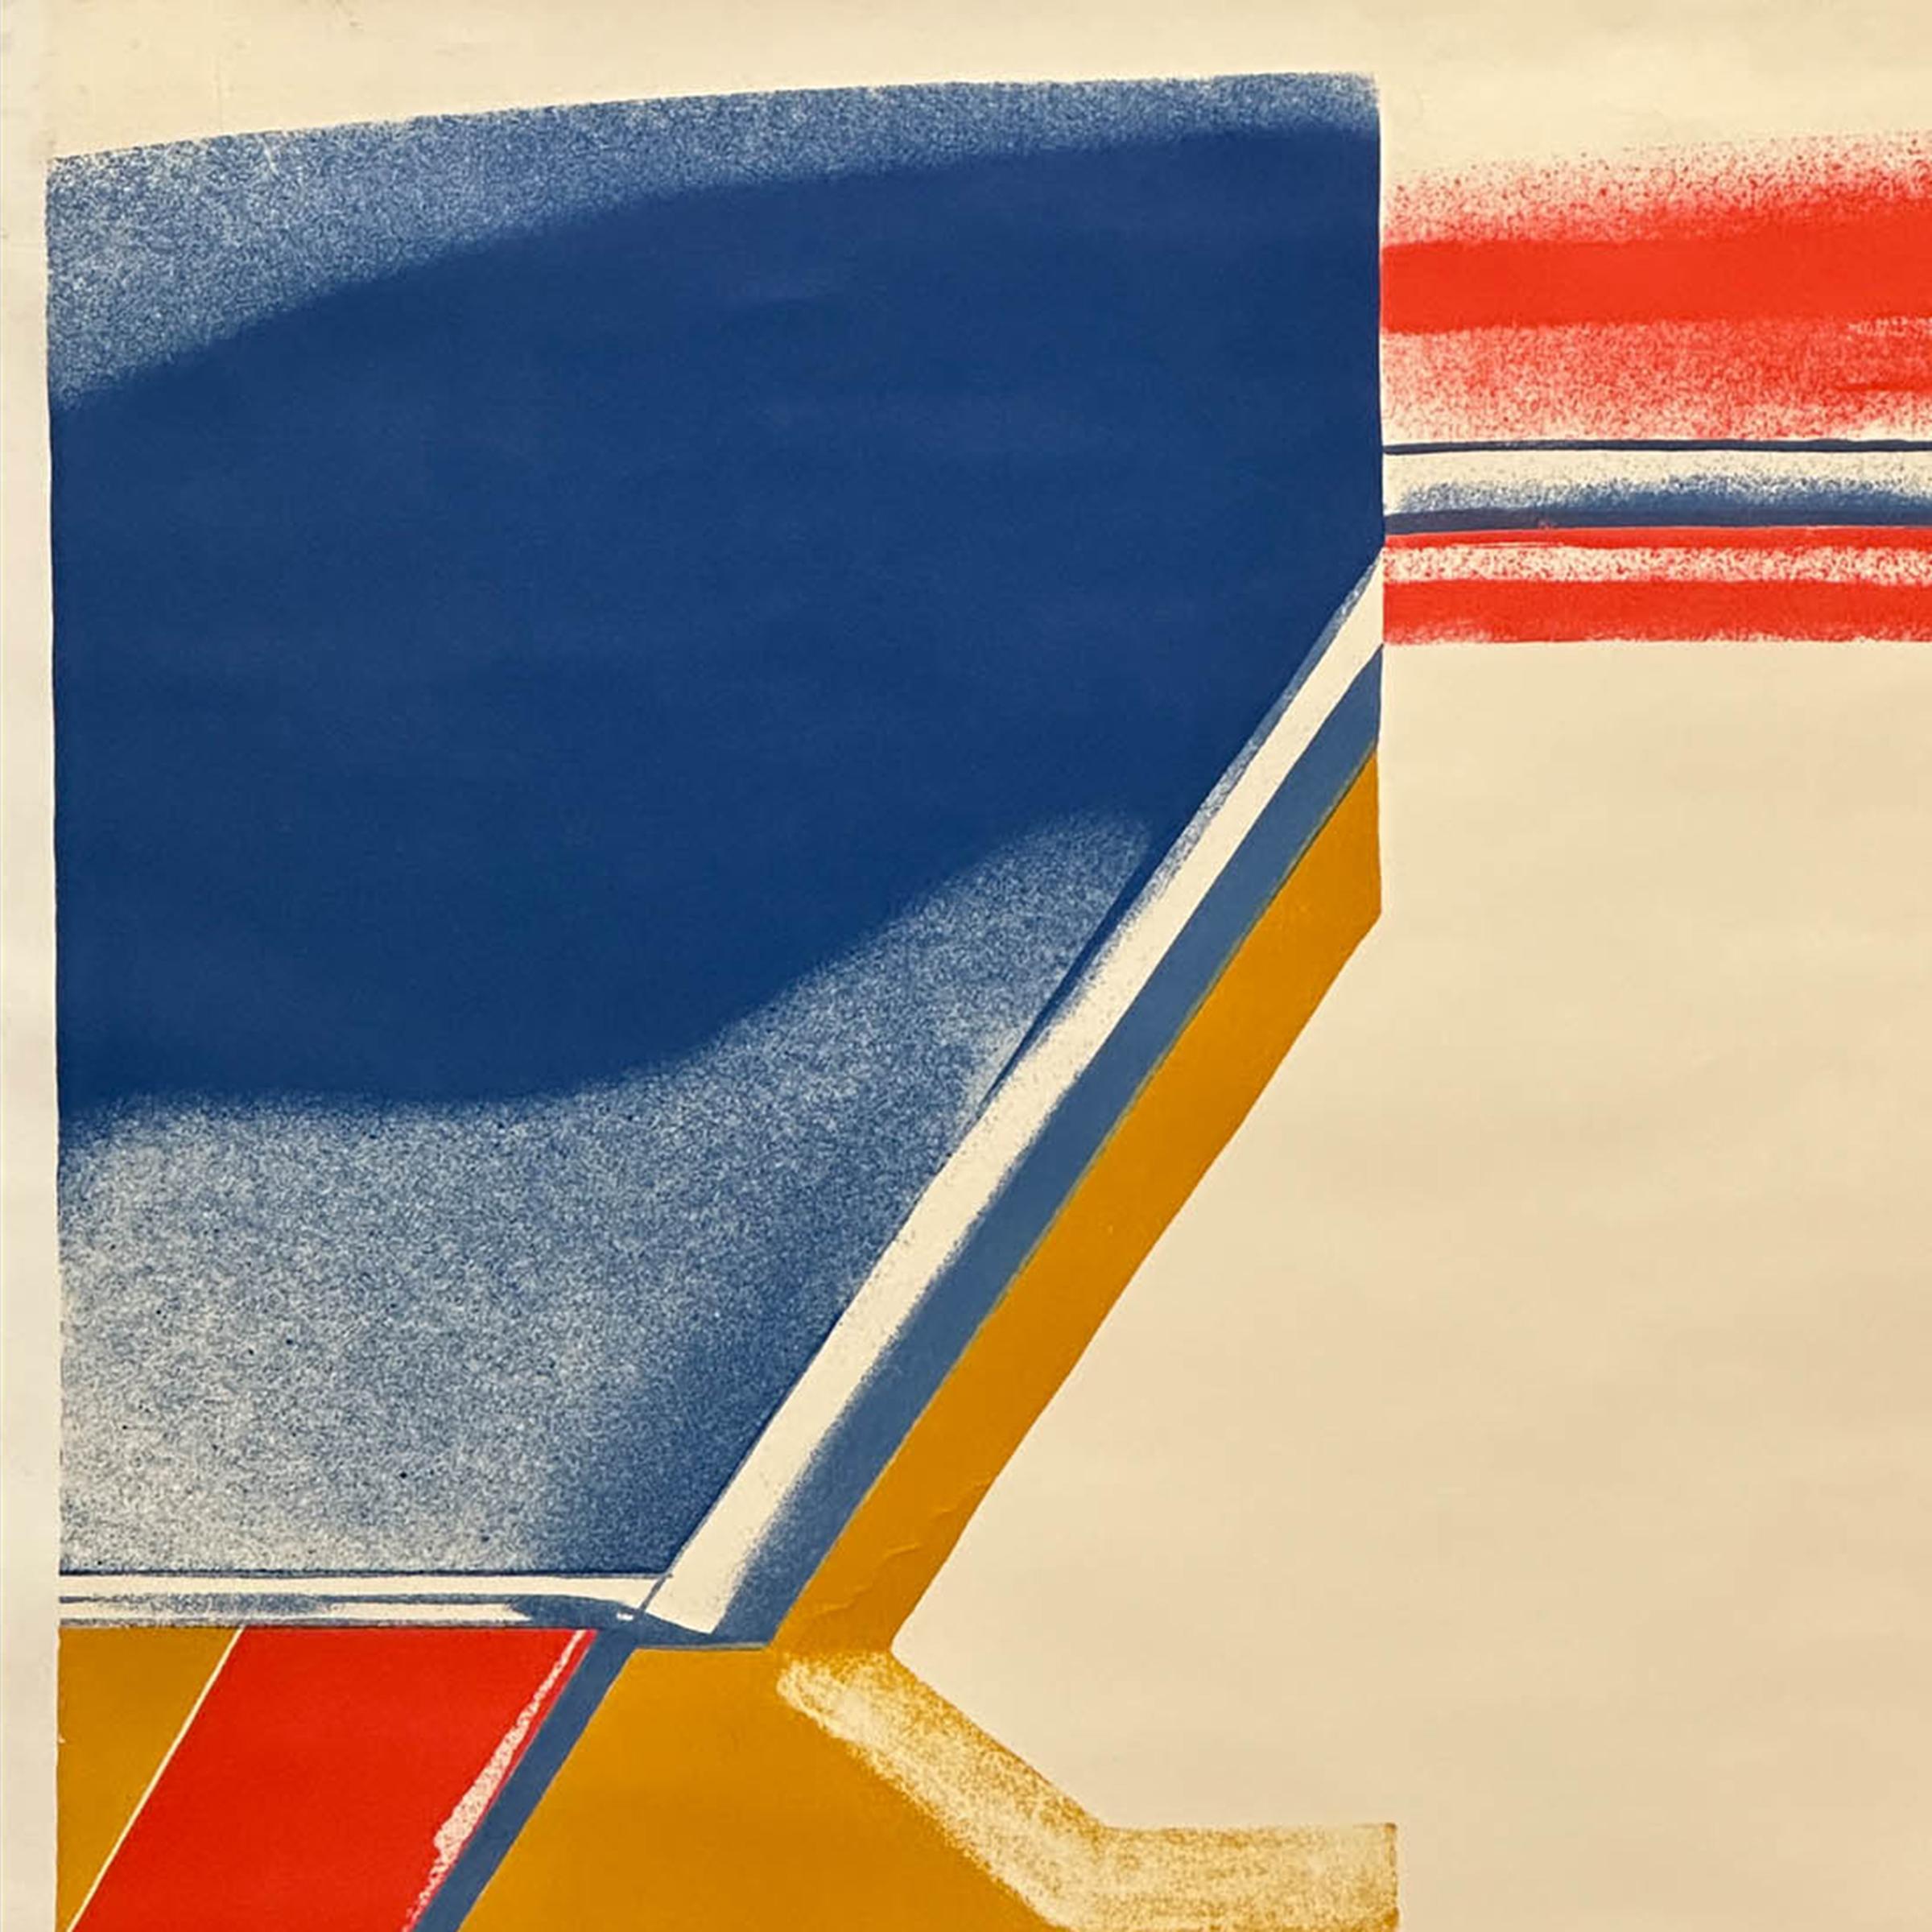 American “Roll Down” 1965 Rosenquist Lithograph 18×22 For Sale